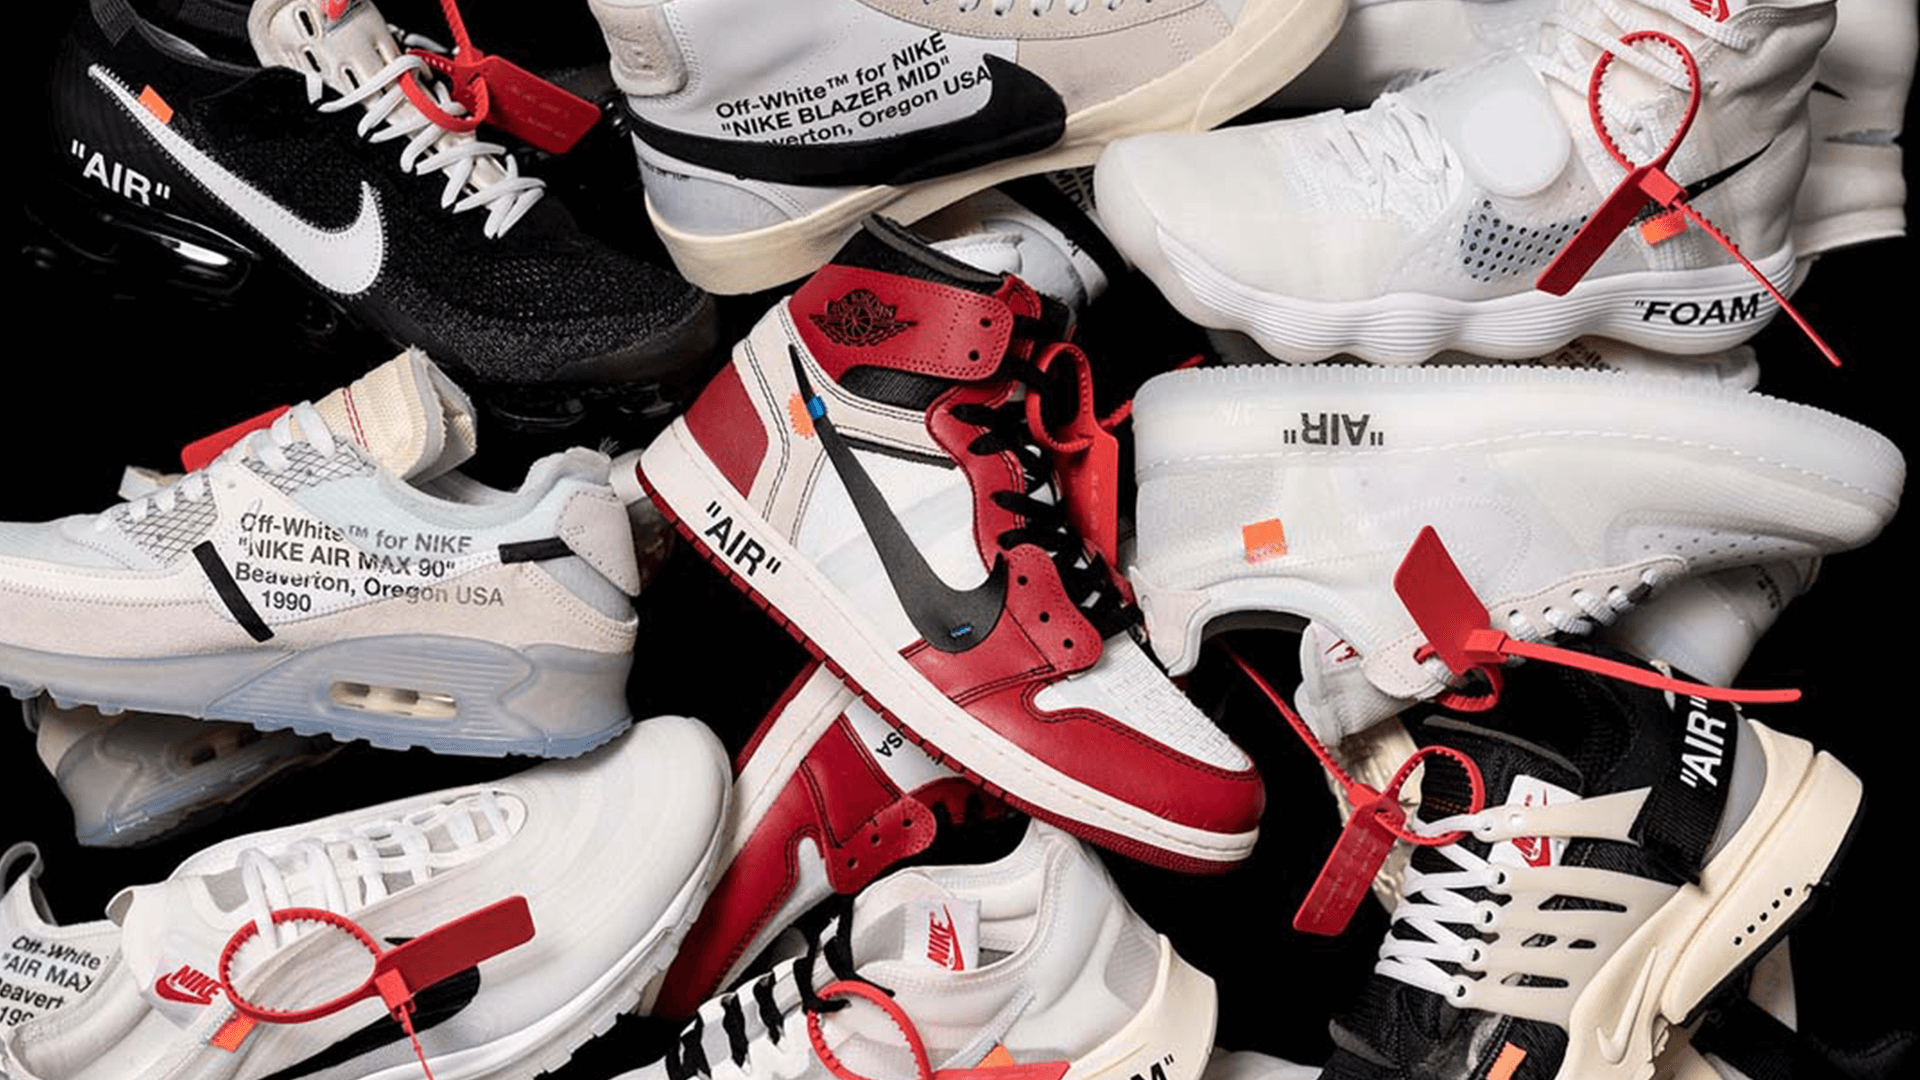 New Off White X Nike Releases on Sale, 59% OFF | www ...